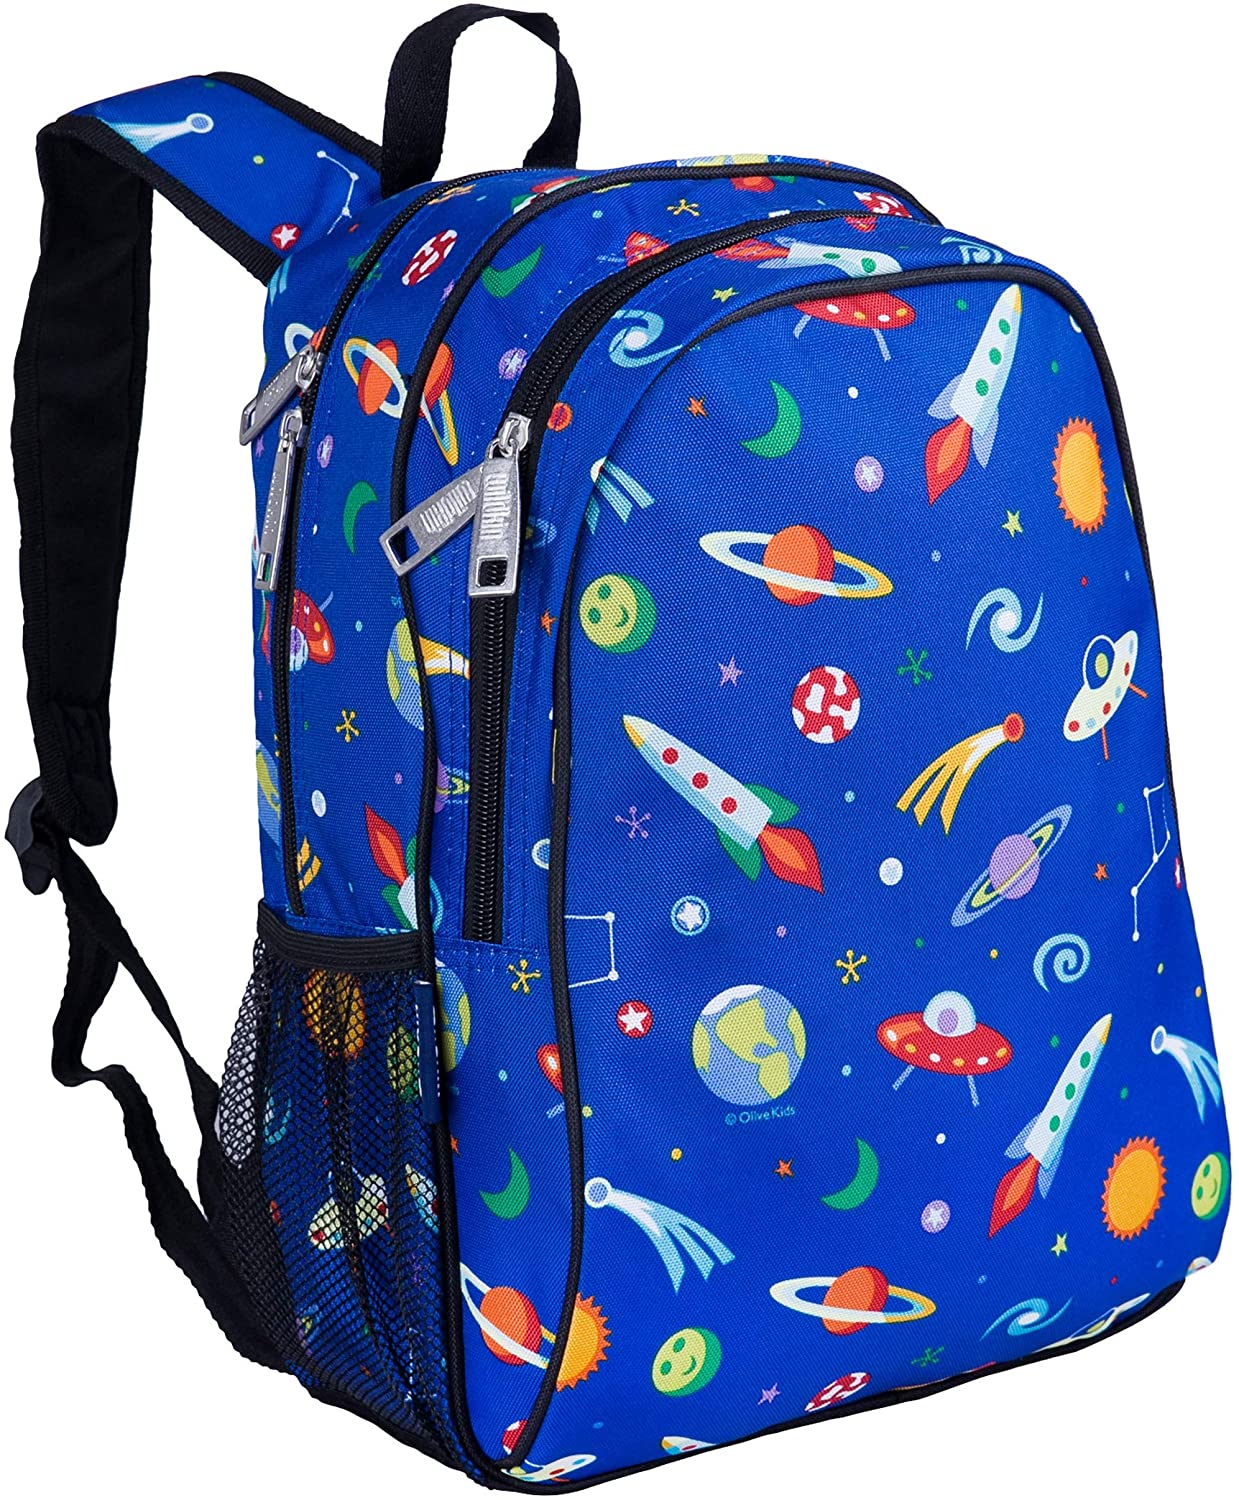 Wildkin Kids 15 Inch Backpack for Boys and Girls